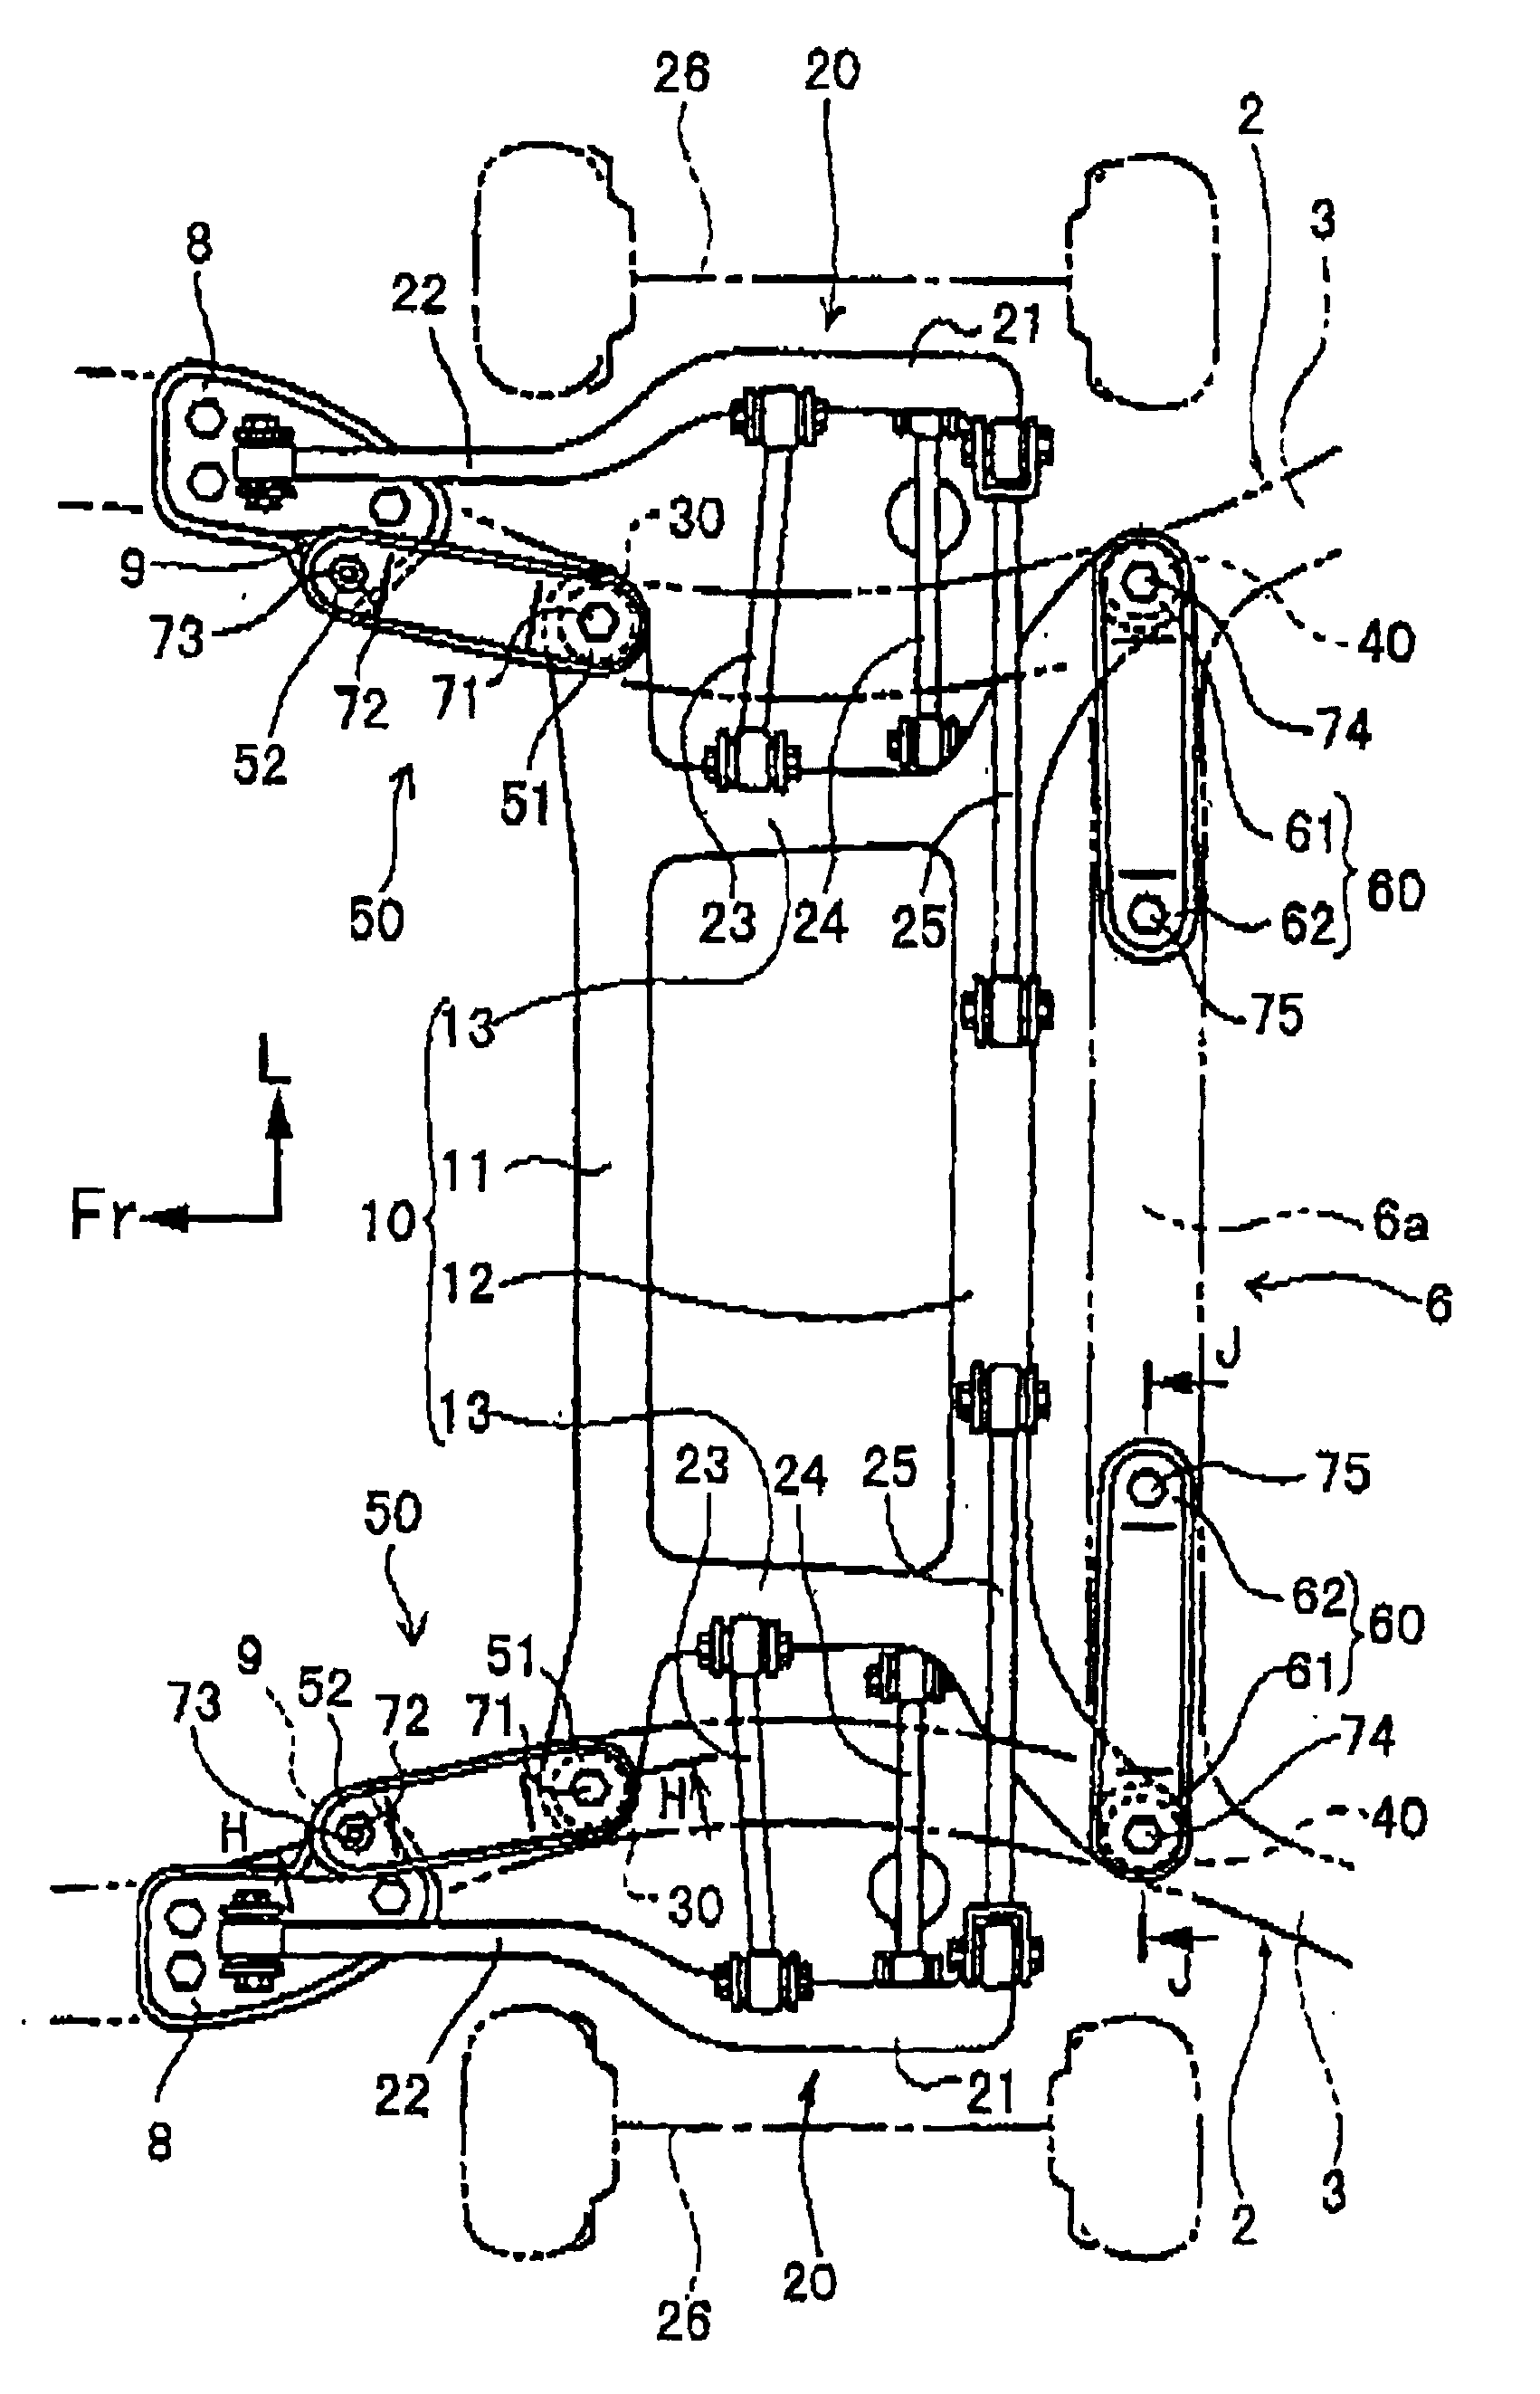 Supporting structure of sub-frame in suspension system for vehicle